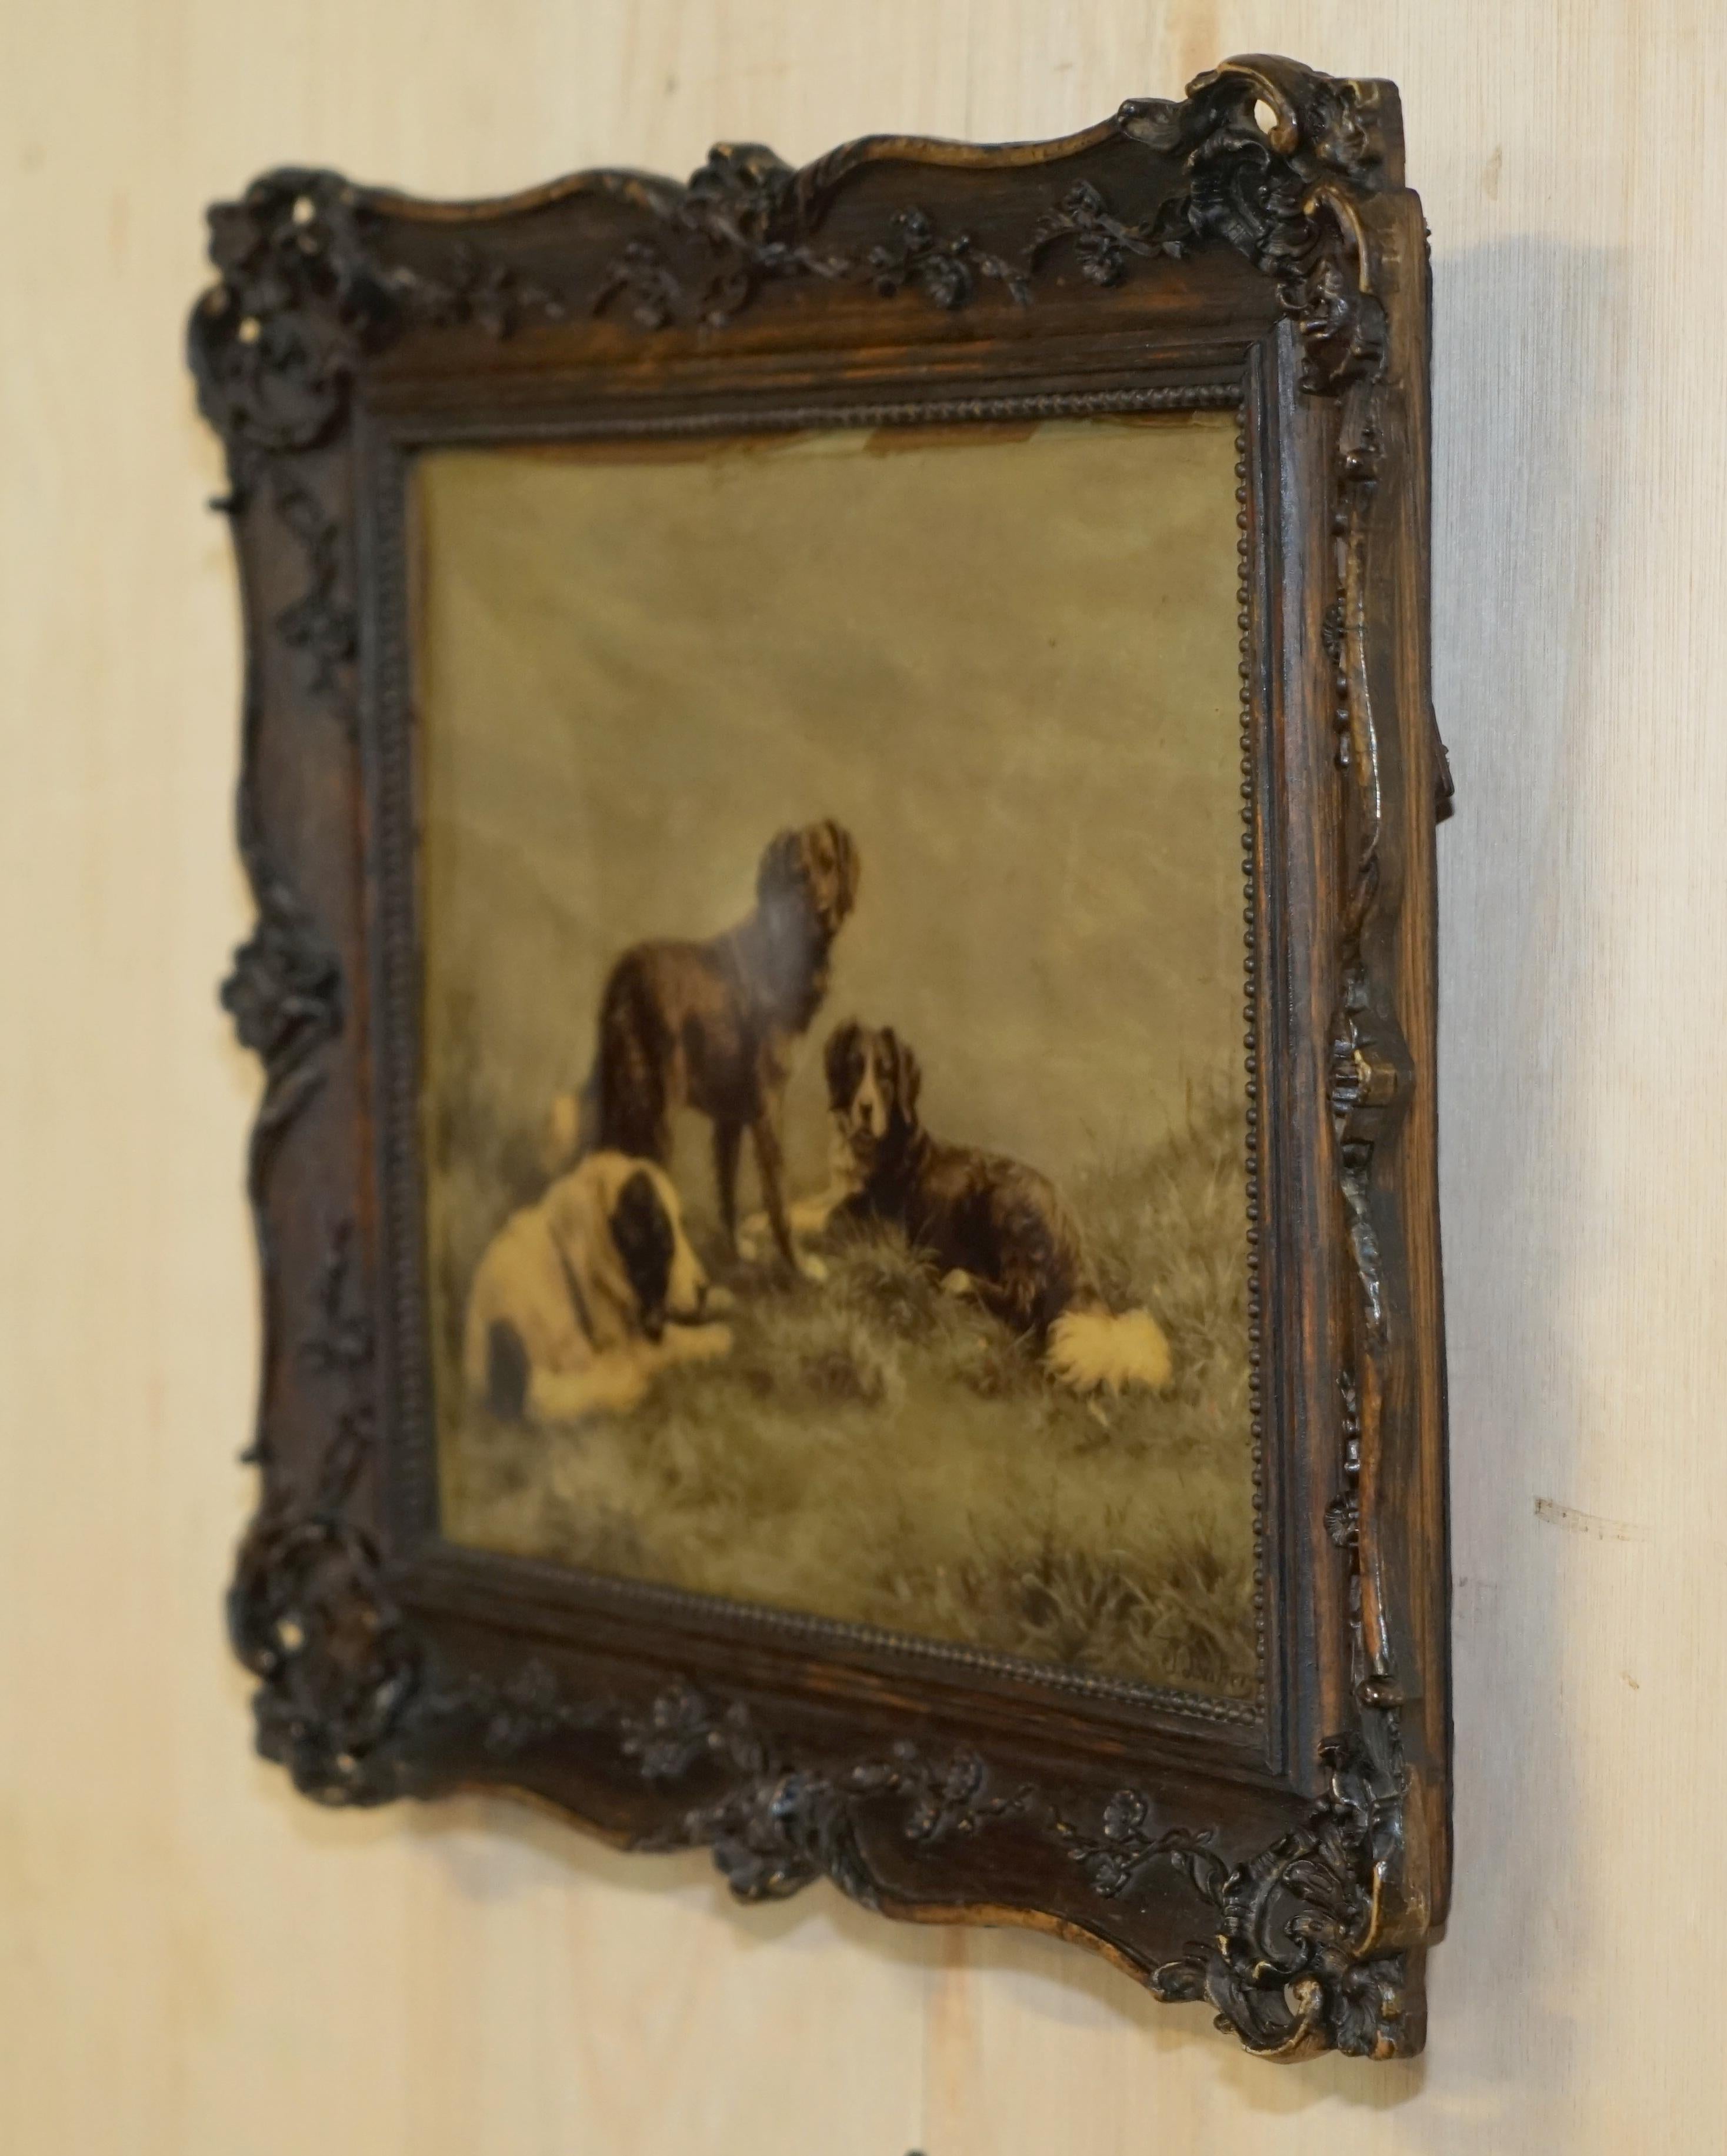 ONE OF TWO ANTIQUE CRYSTOLEUM HAND CARVED HARDWOOD FRAMED PiCTURES OF DOGSv 8